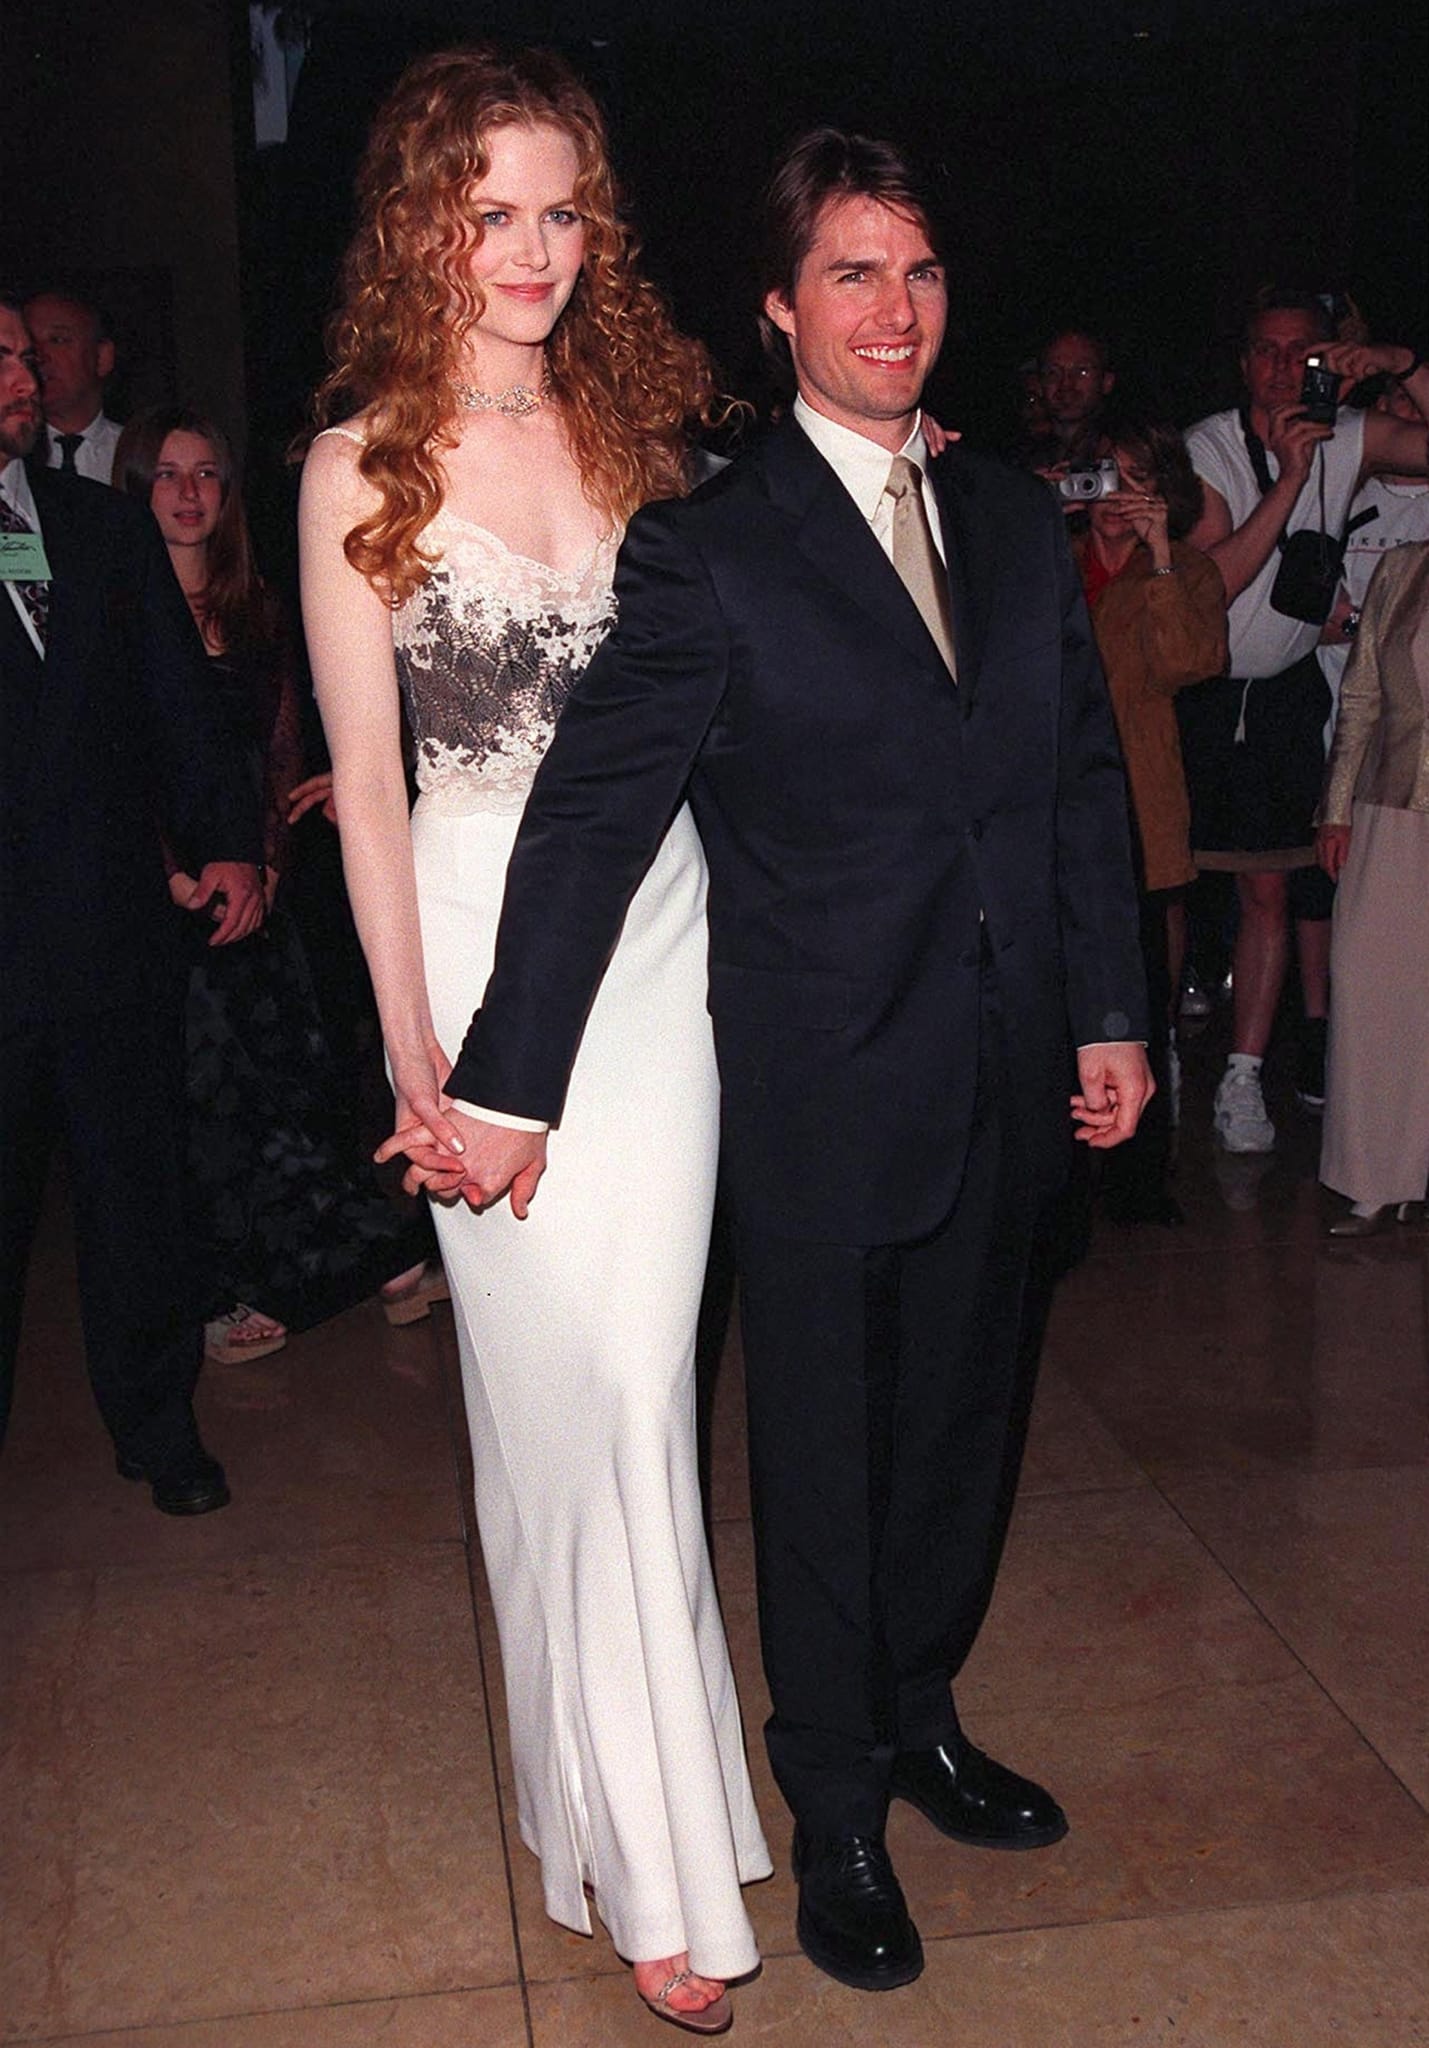 Nicole Kidman and Tom Cruise tied the knot in 1990 before divorcing in 2001